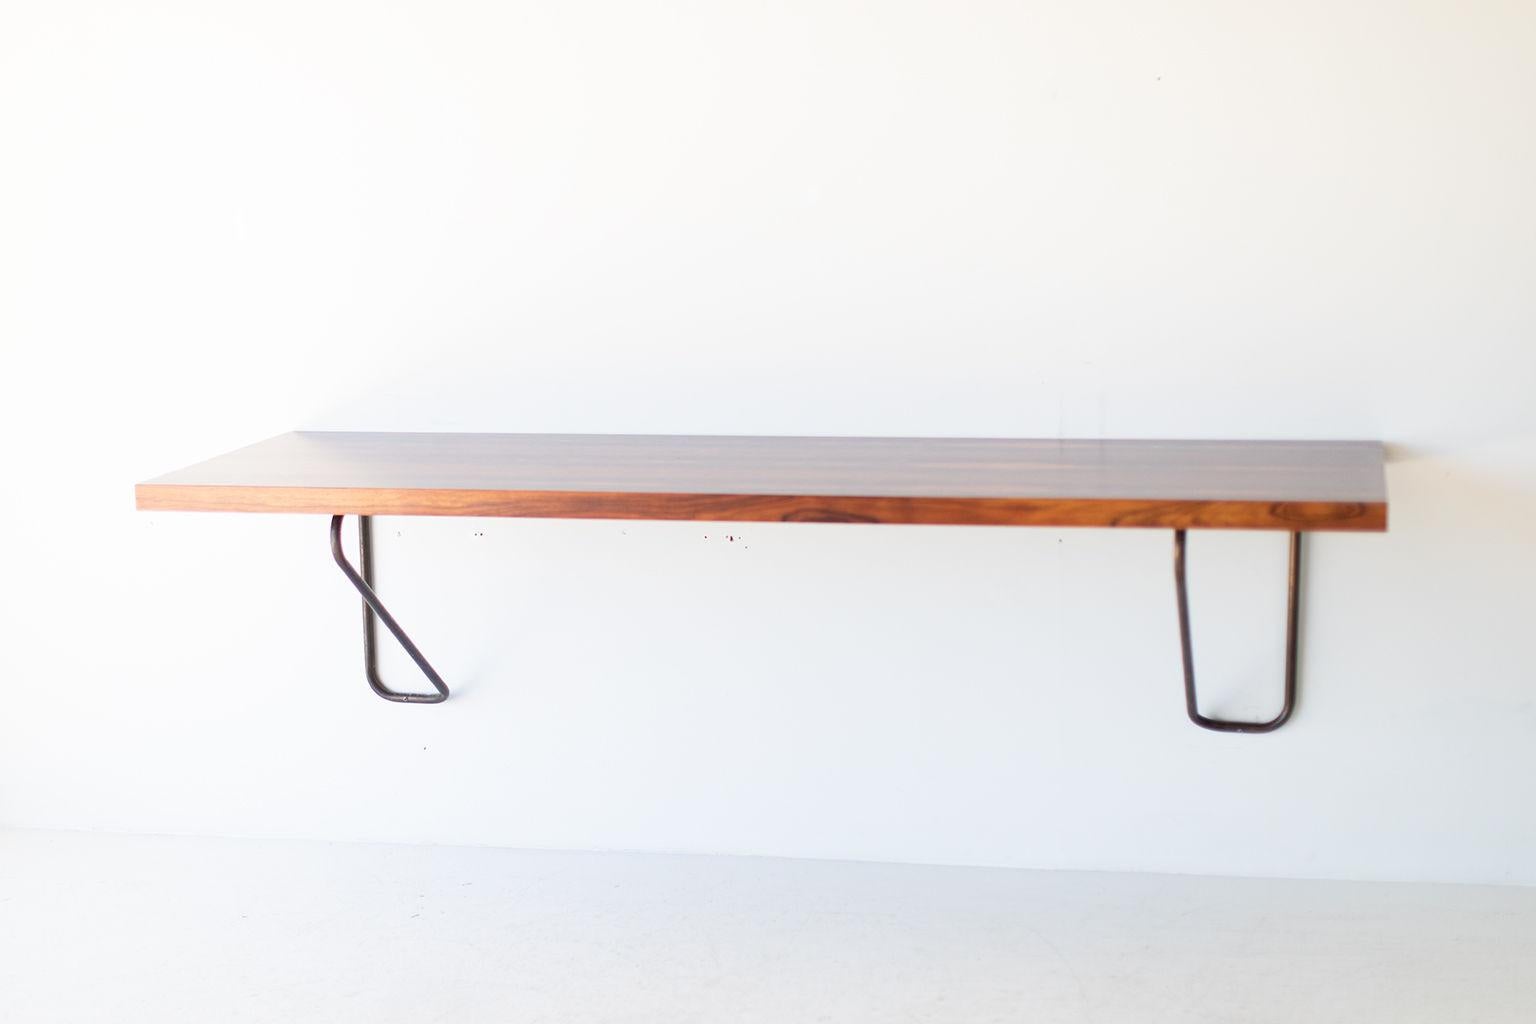 Designer: Milo Baughman

Manufacturer: Thayer Coggin.
Period or model: Mid-Century Modern.
Specs: Rosewood, brass.

Condition:

This Milo Baughman rosewood and brass floating desk for Thayer Coggin is in very good condition. The rosewood top